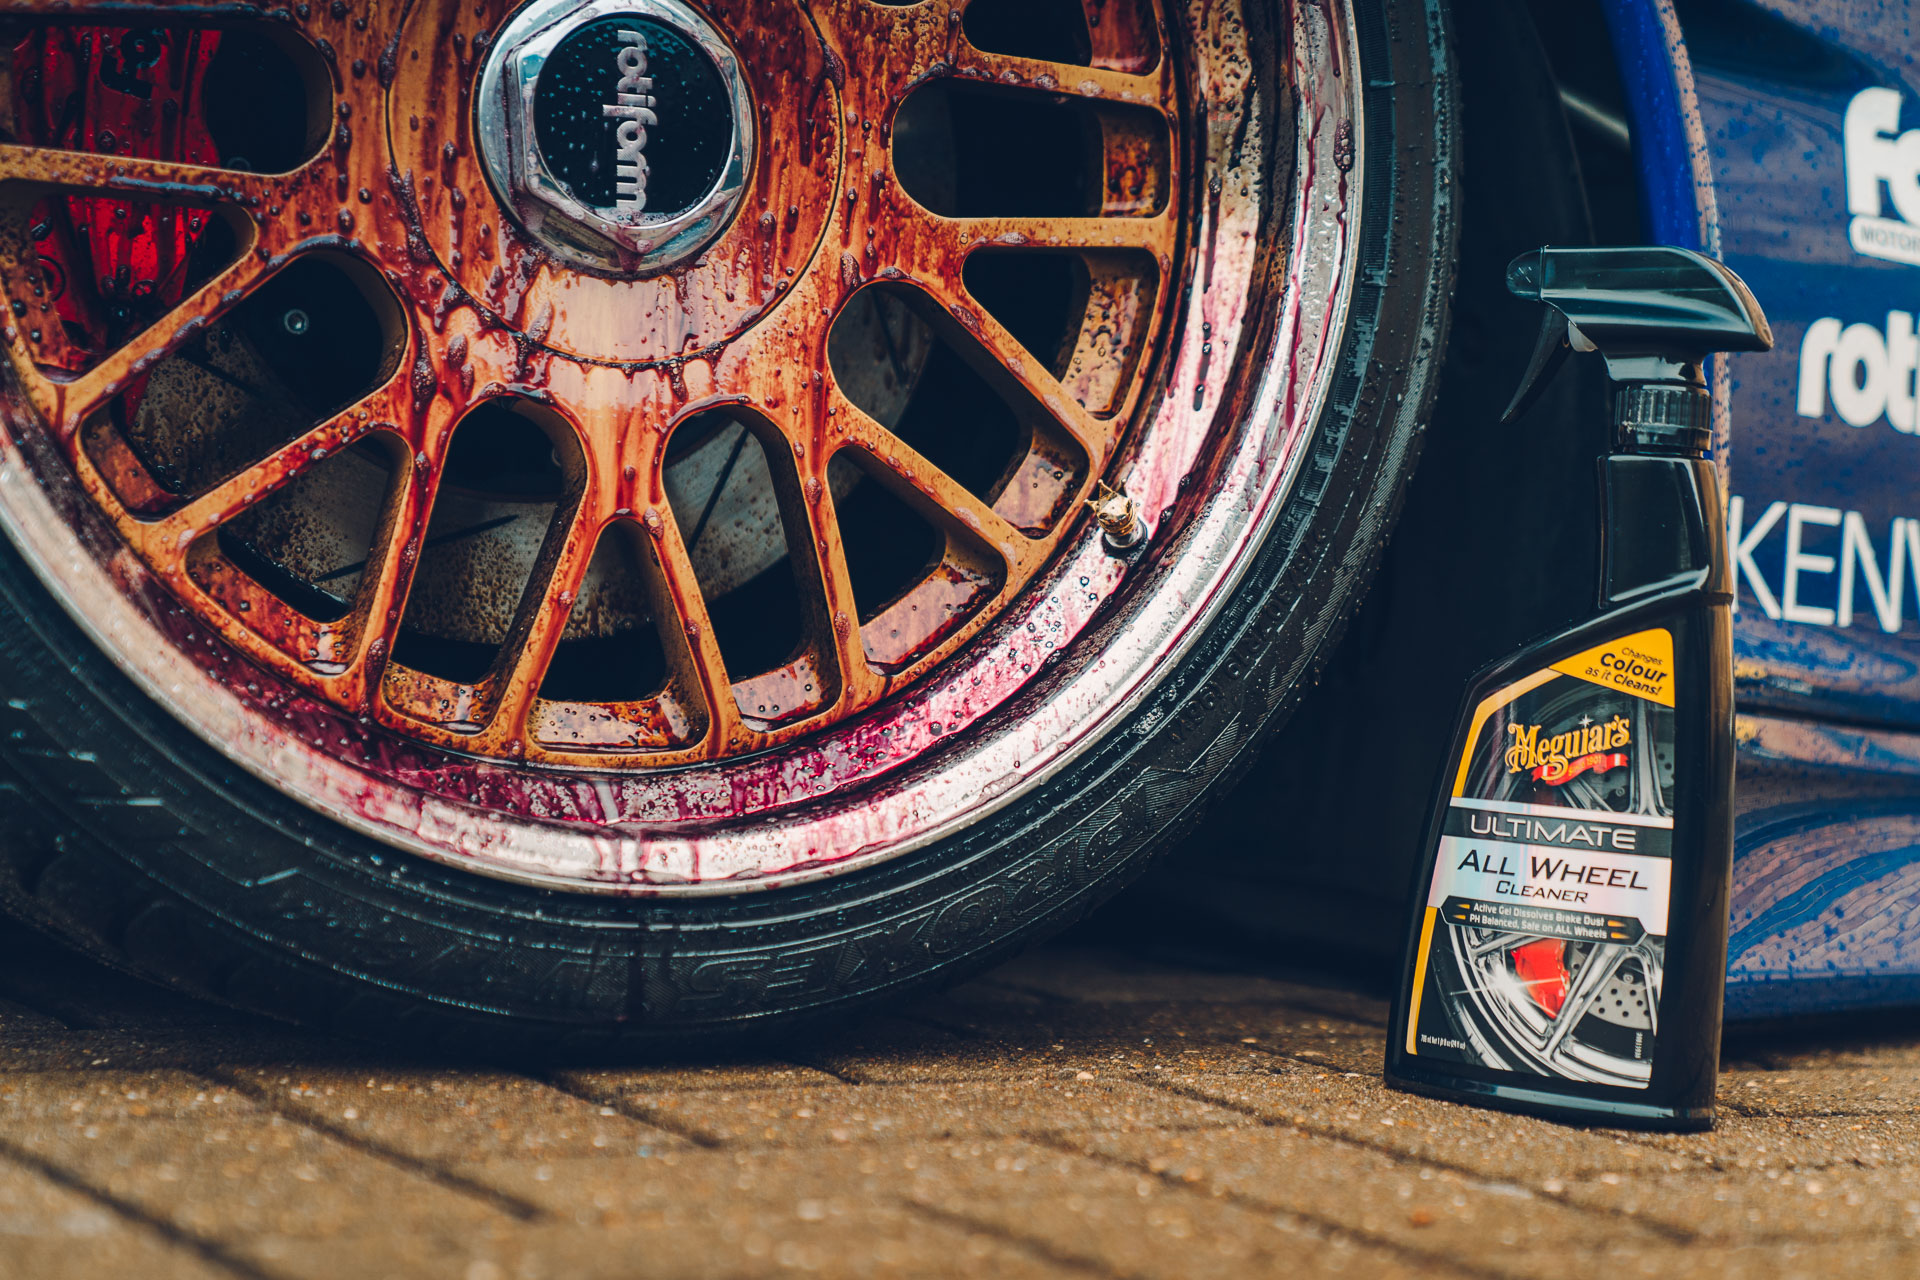 Meguiar's Ultimate Wheel Cleaner – The Dos and Don'ts - Meguiars UK